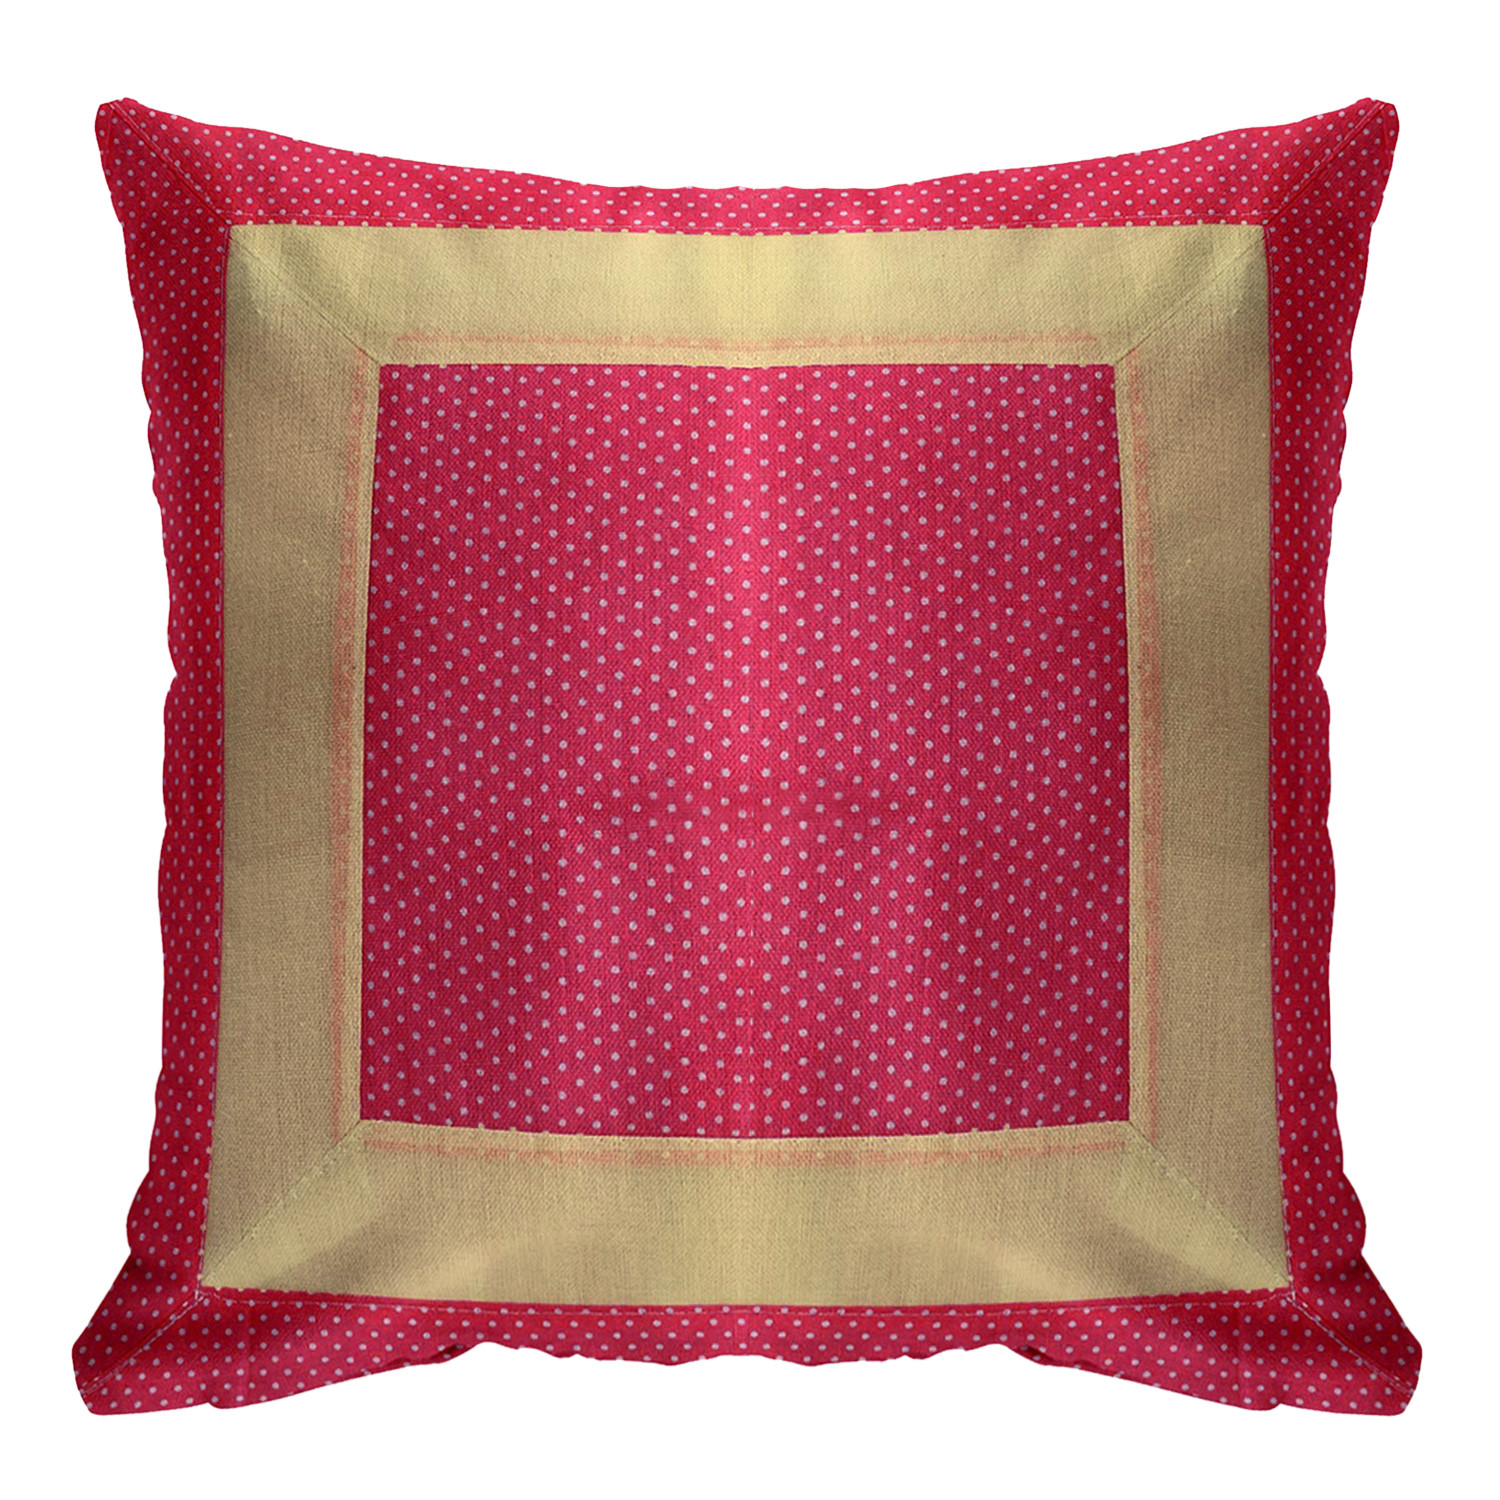 Kuber Industries Dot Print Soft Decorative Square Cushion Cover, Cushion Case For Sofa Couch Bed 16x16 Inch-(Pink)